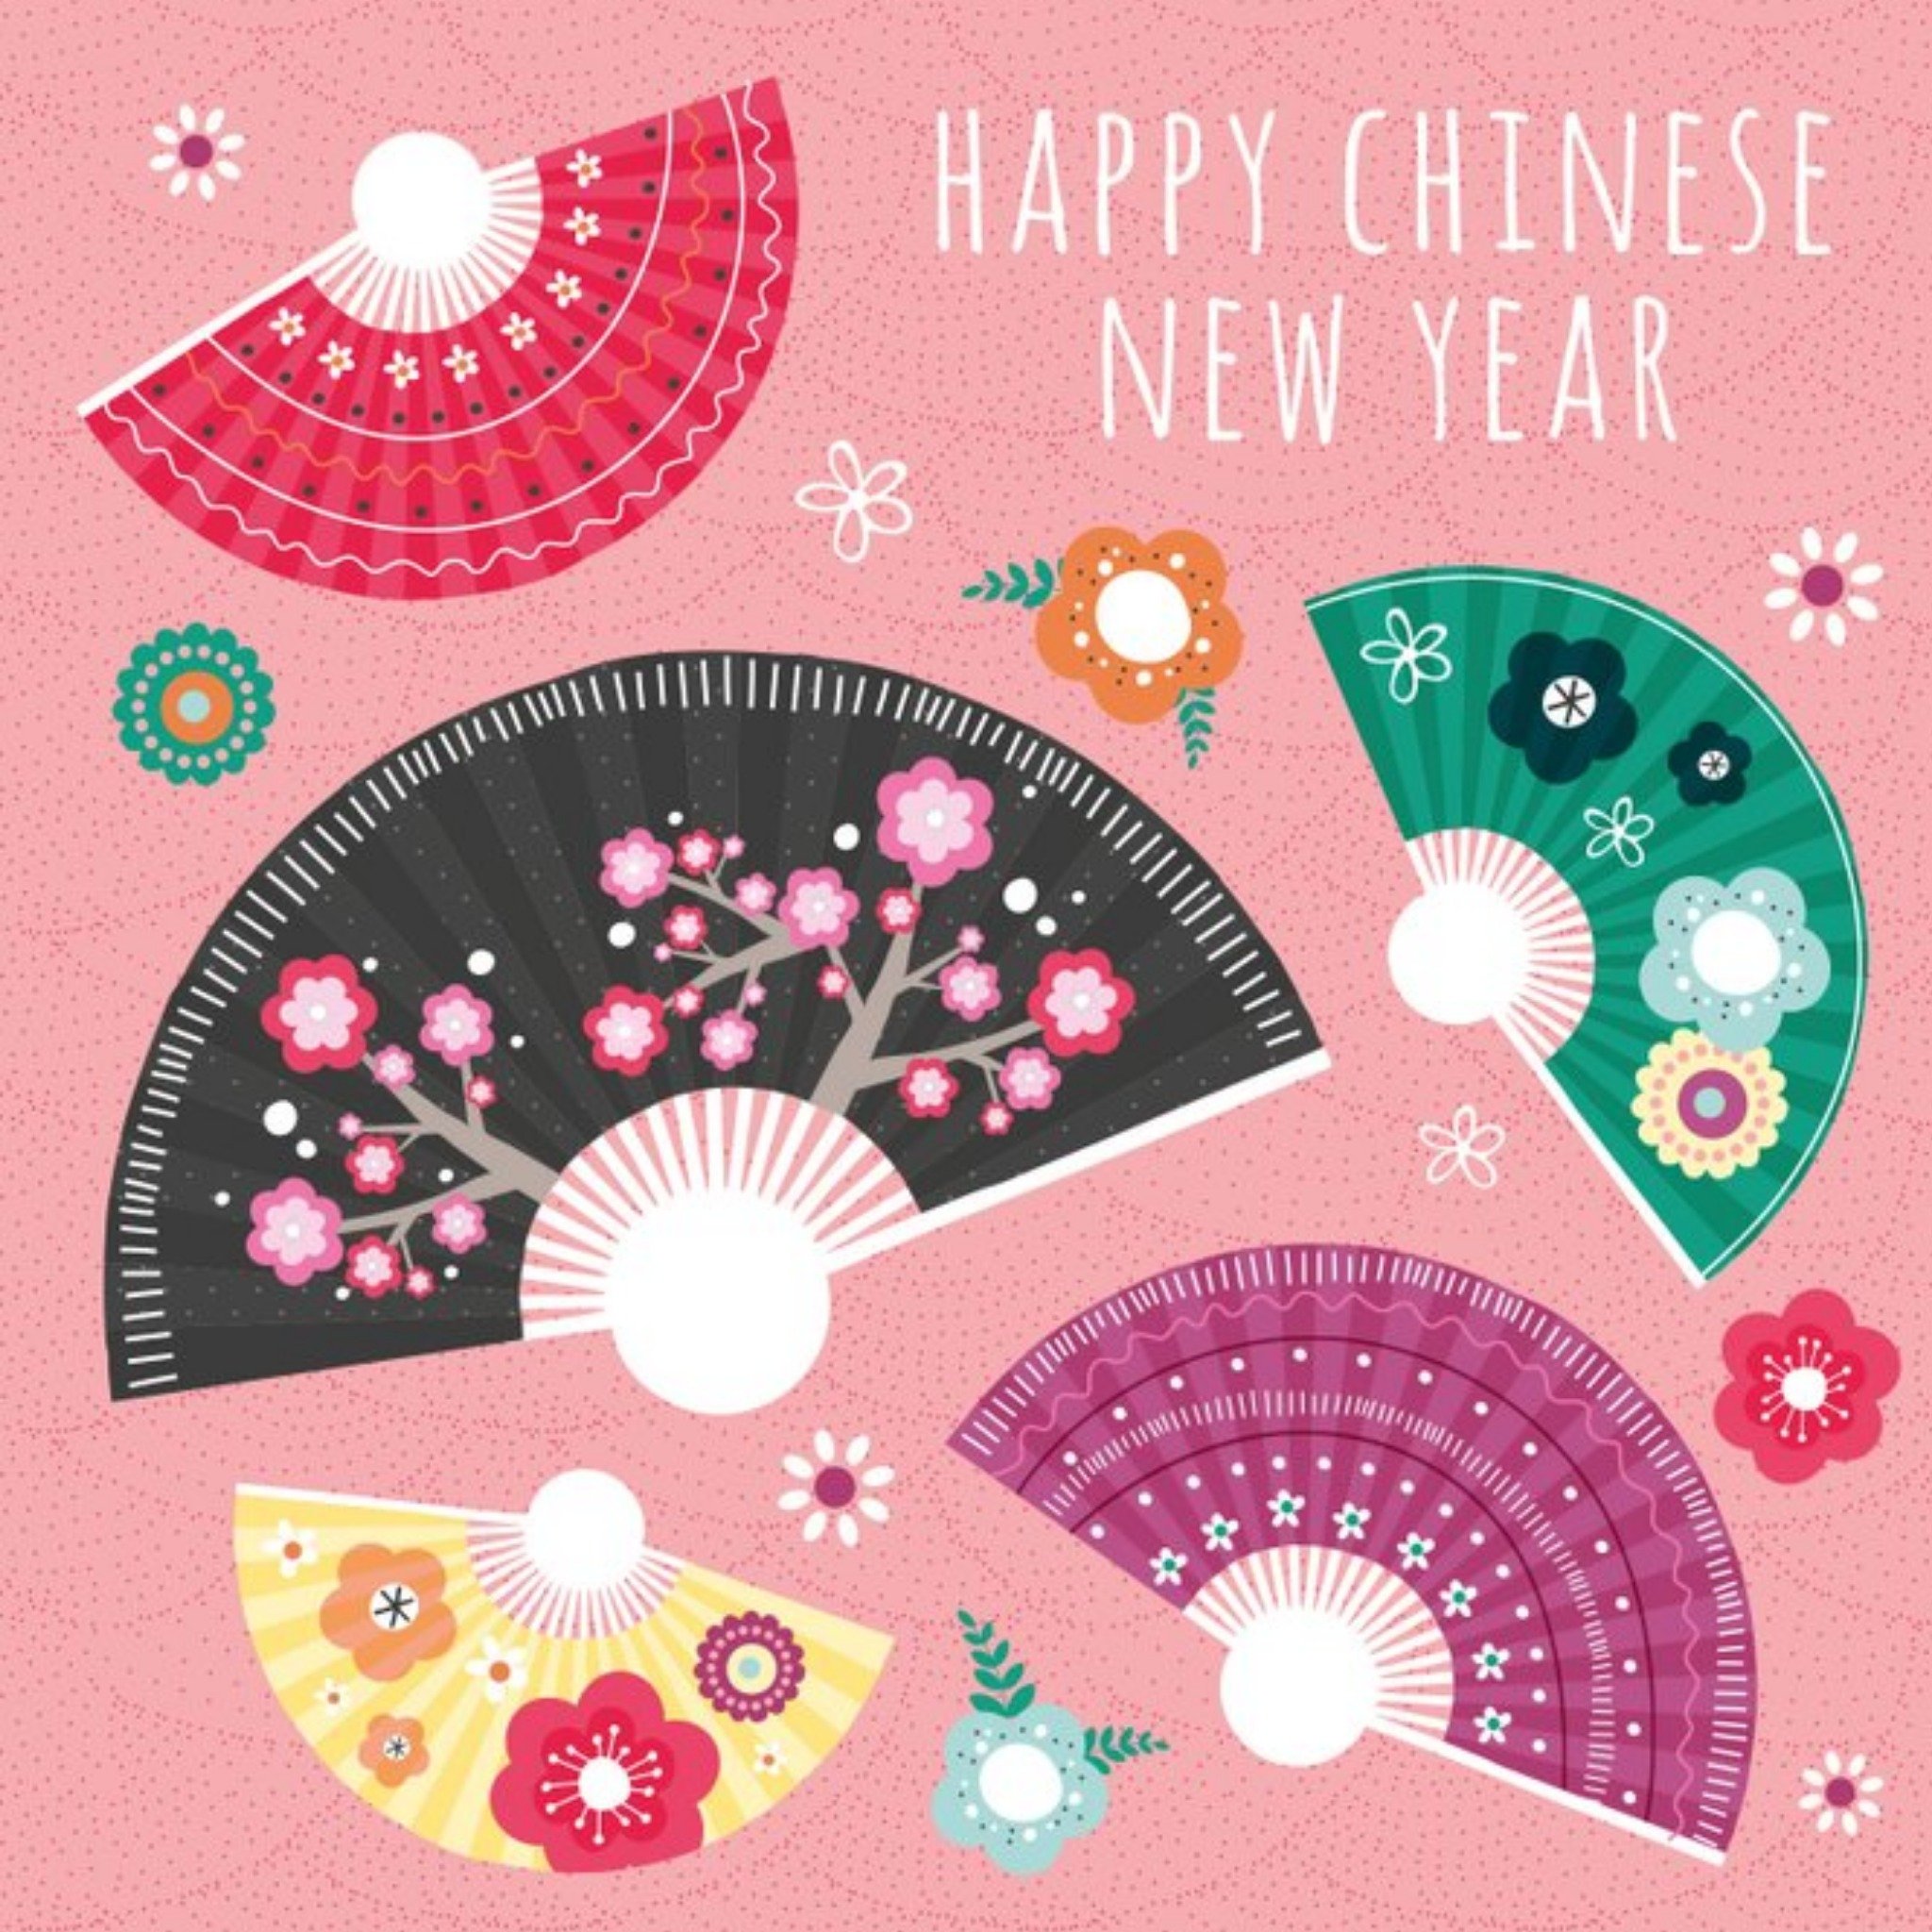 Moonpig Fans 2021 Happy Chinese New Year Card, Large